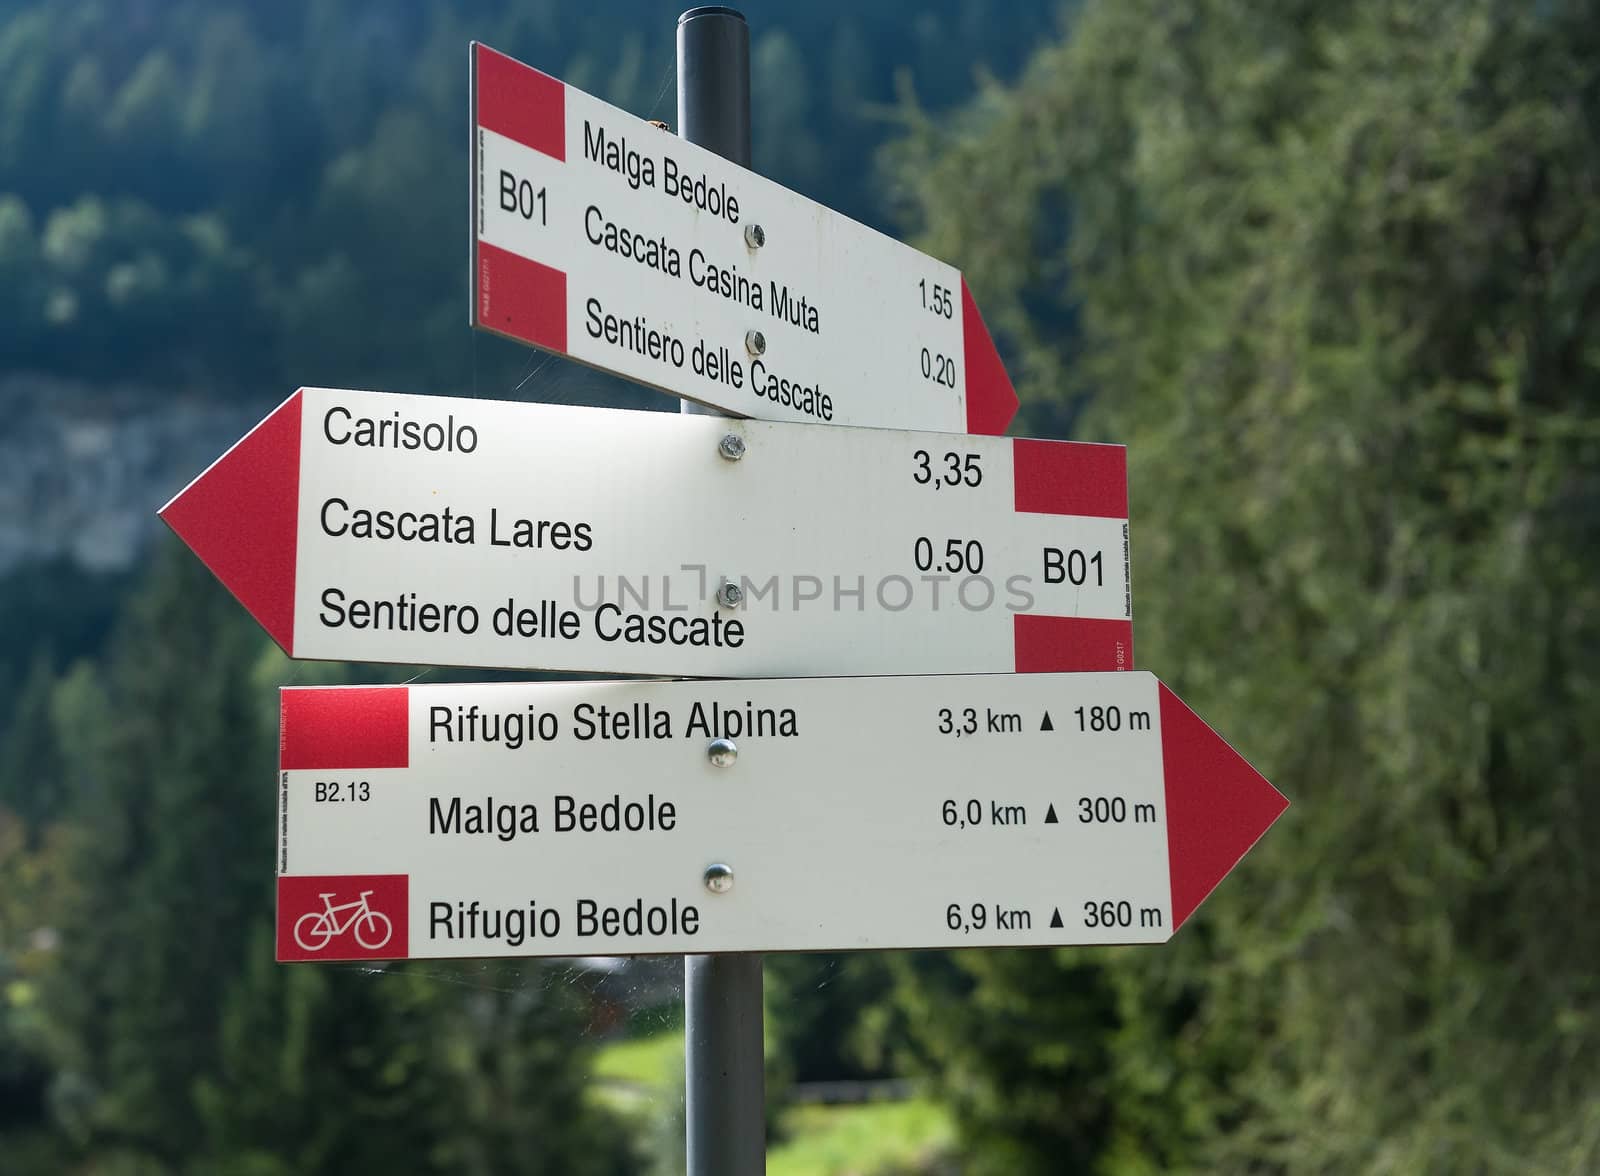 Direction indicator in the Genova valley, Italy